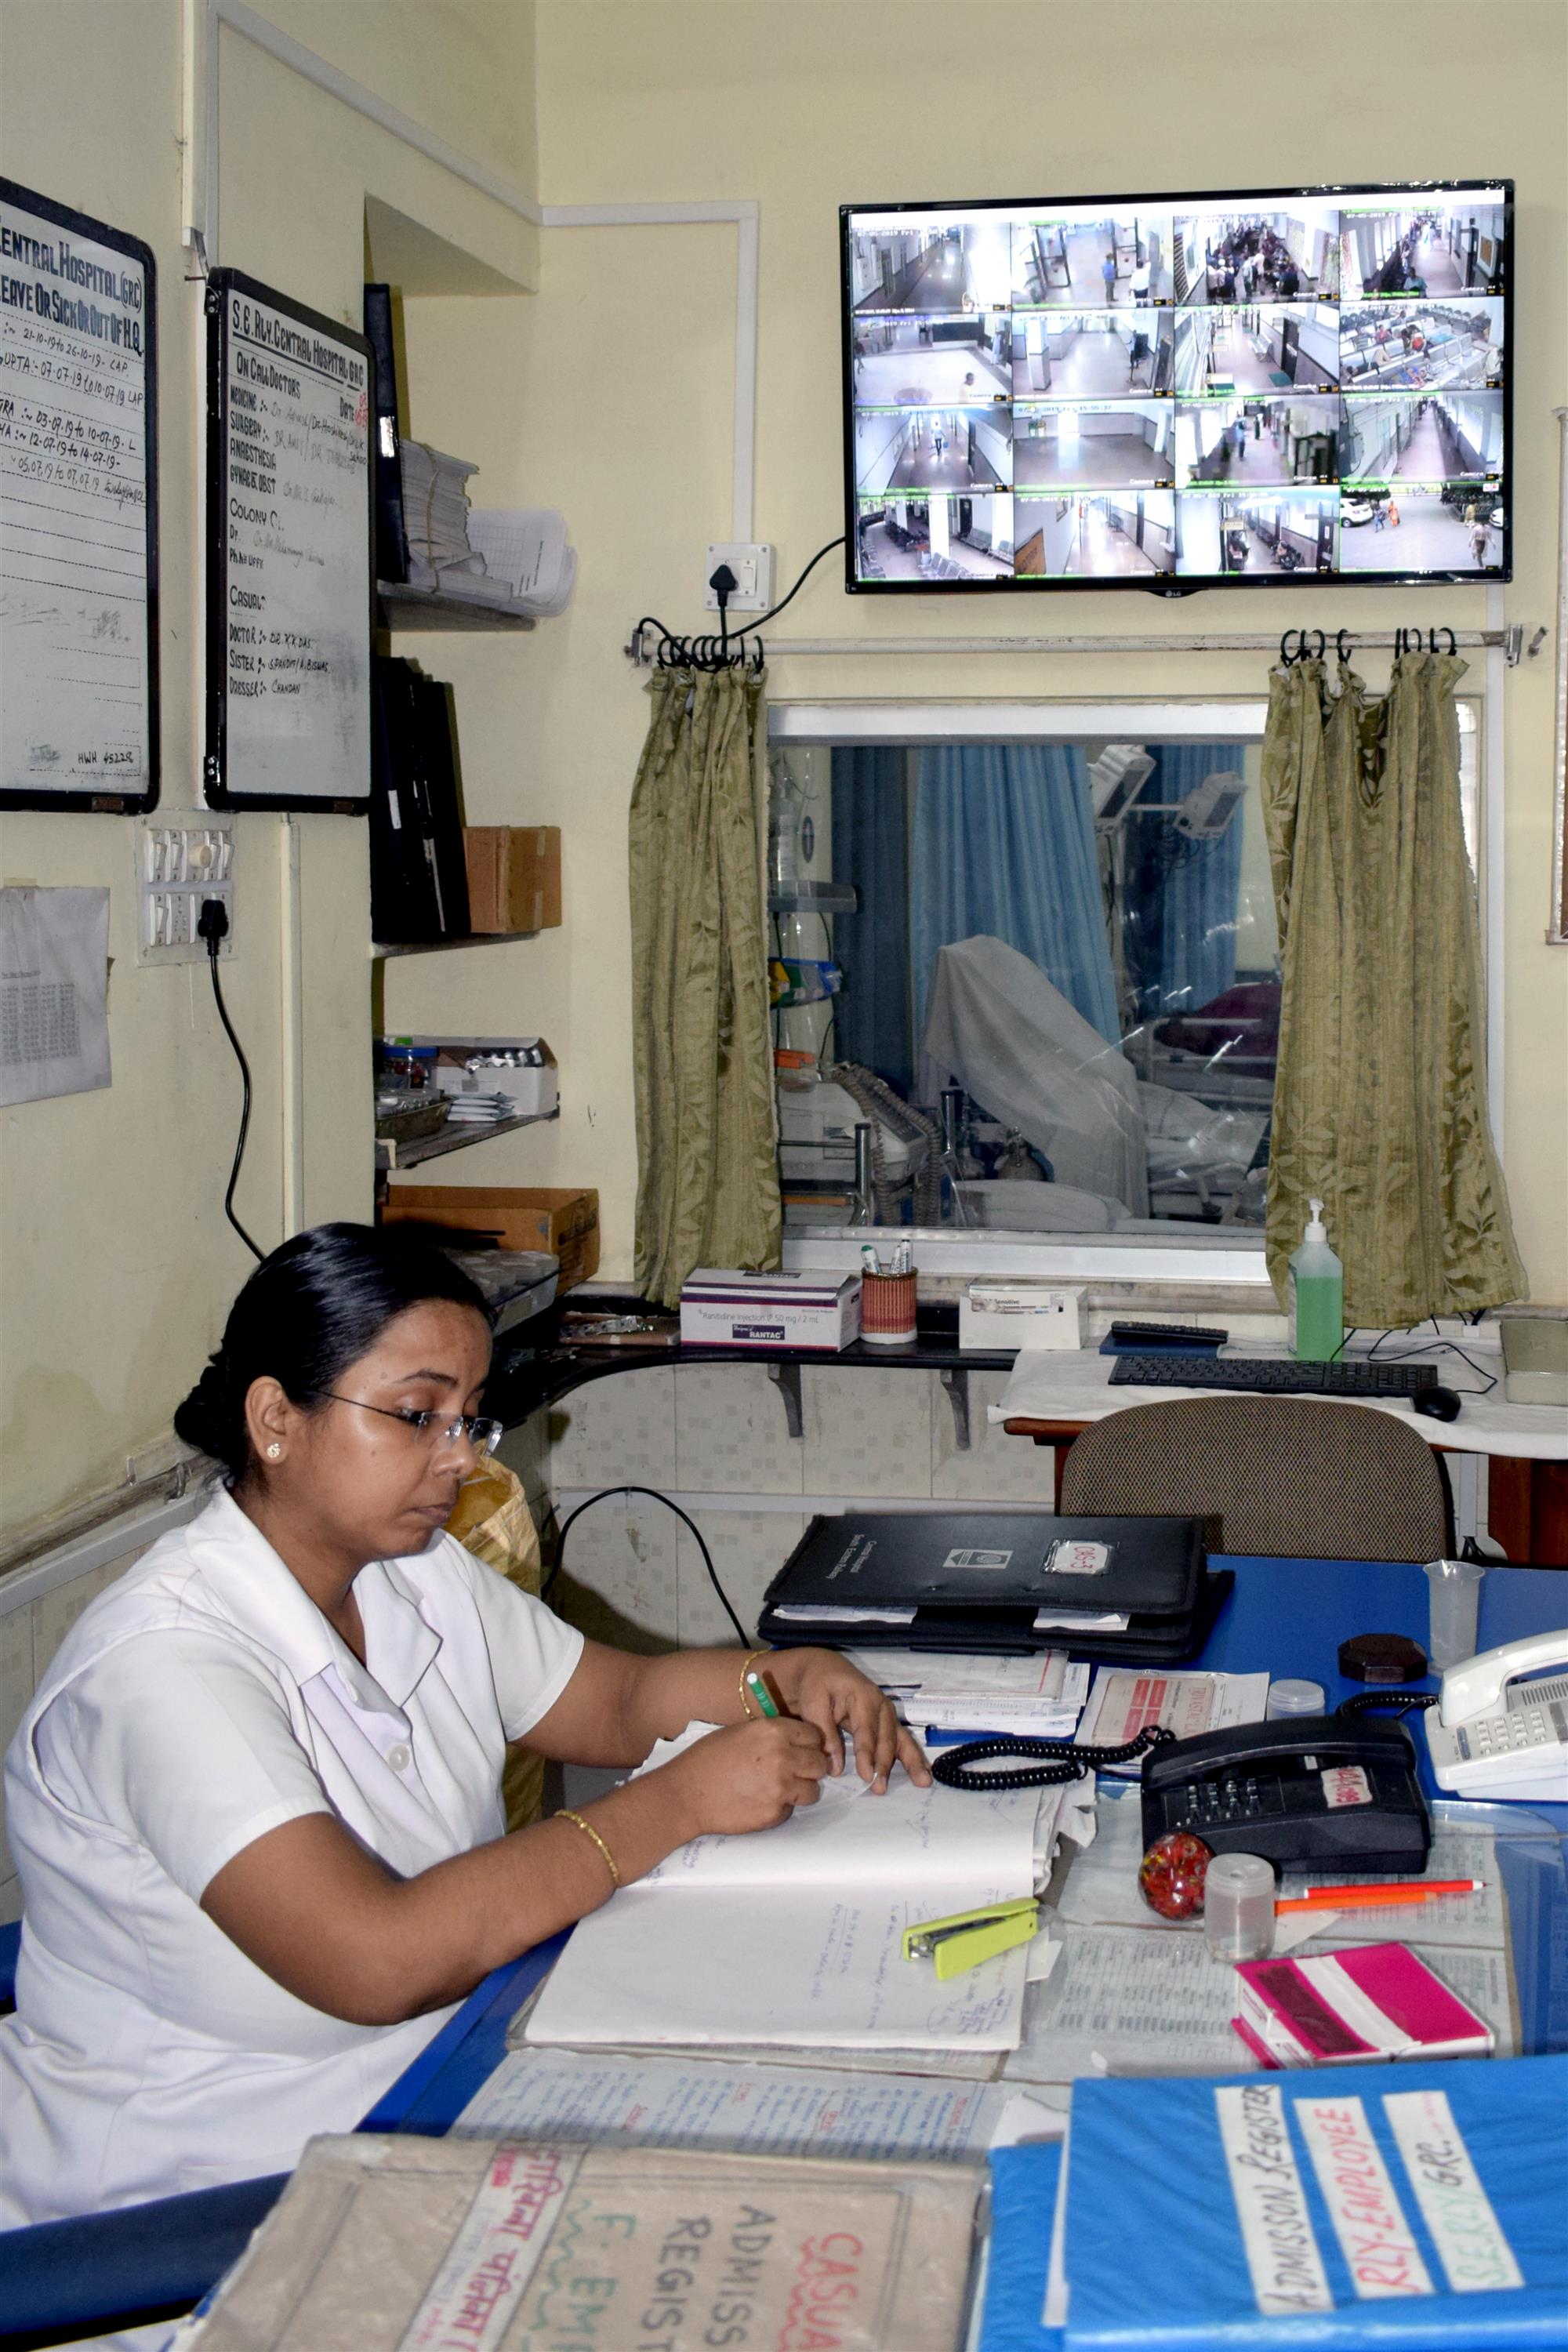 Sri P S Mishra, General Manager, S E Railway inaugurating Hospital Information Management System (HIMS) and CCTV at SER Central Hospital, Garden Reach on 05-7-2019.